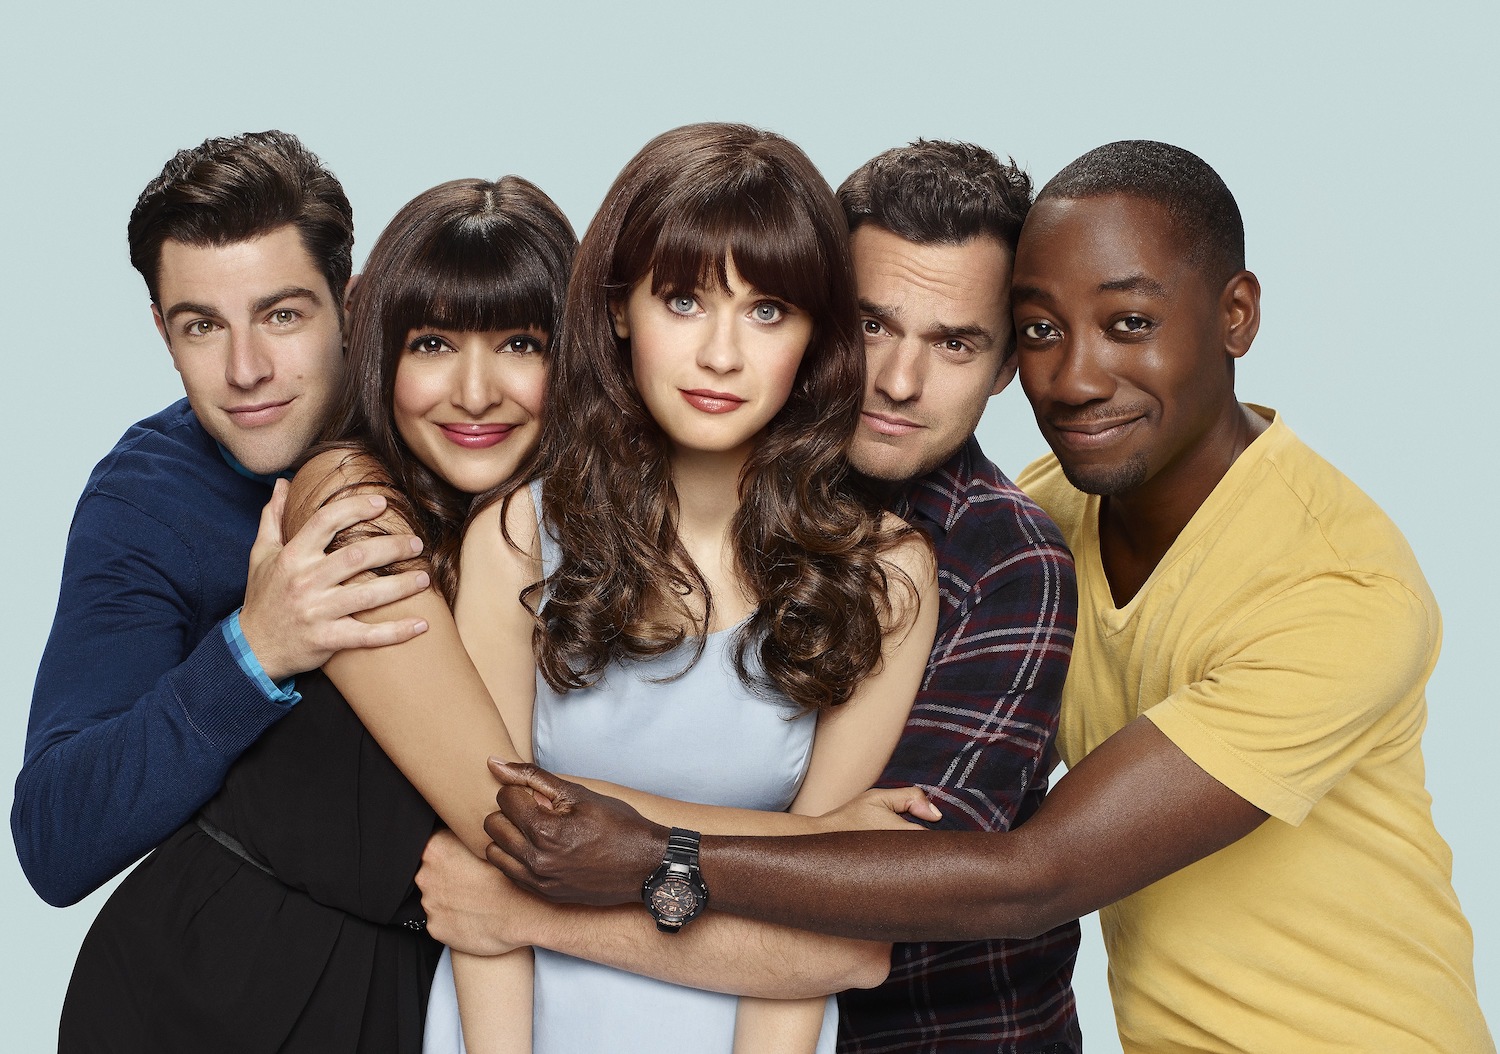 'New Girl' cast: Max Greenfield, Hannah Simone, Zooey Deschanel, Jake Johnson, and Lamorne Morris pose in character